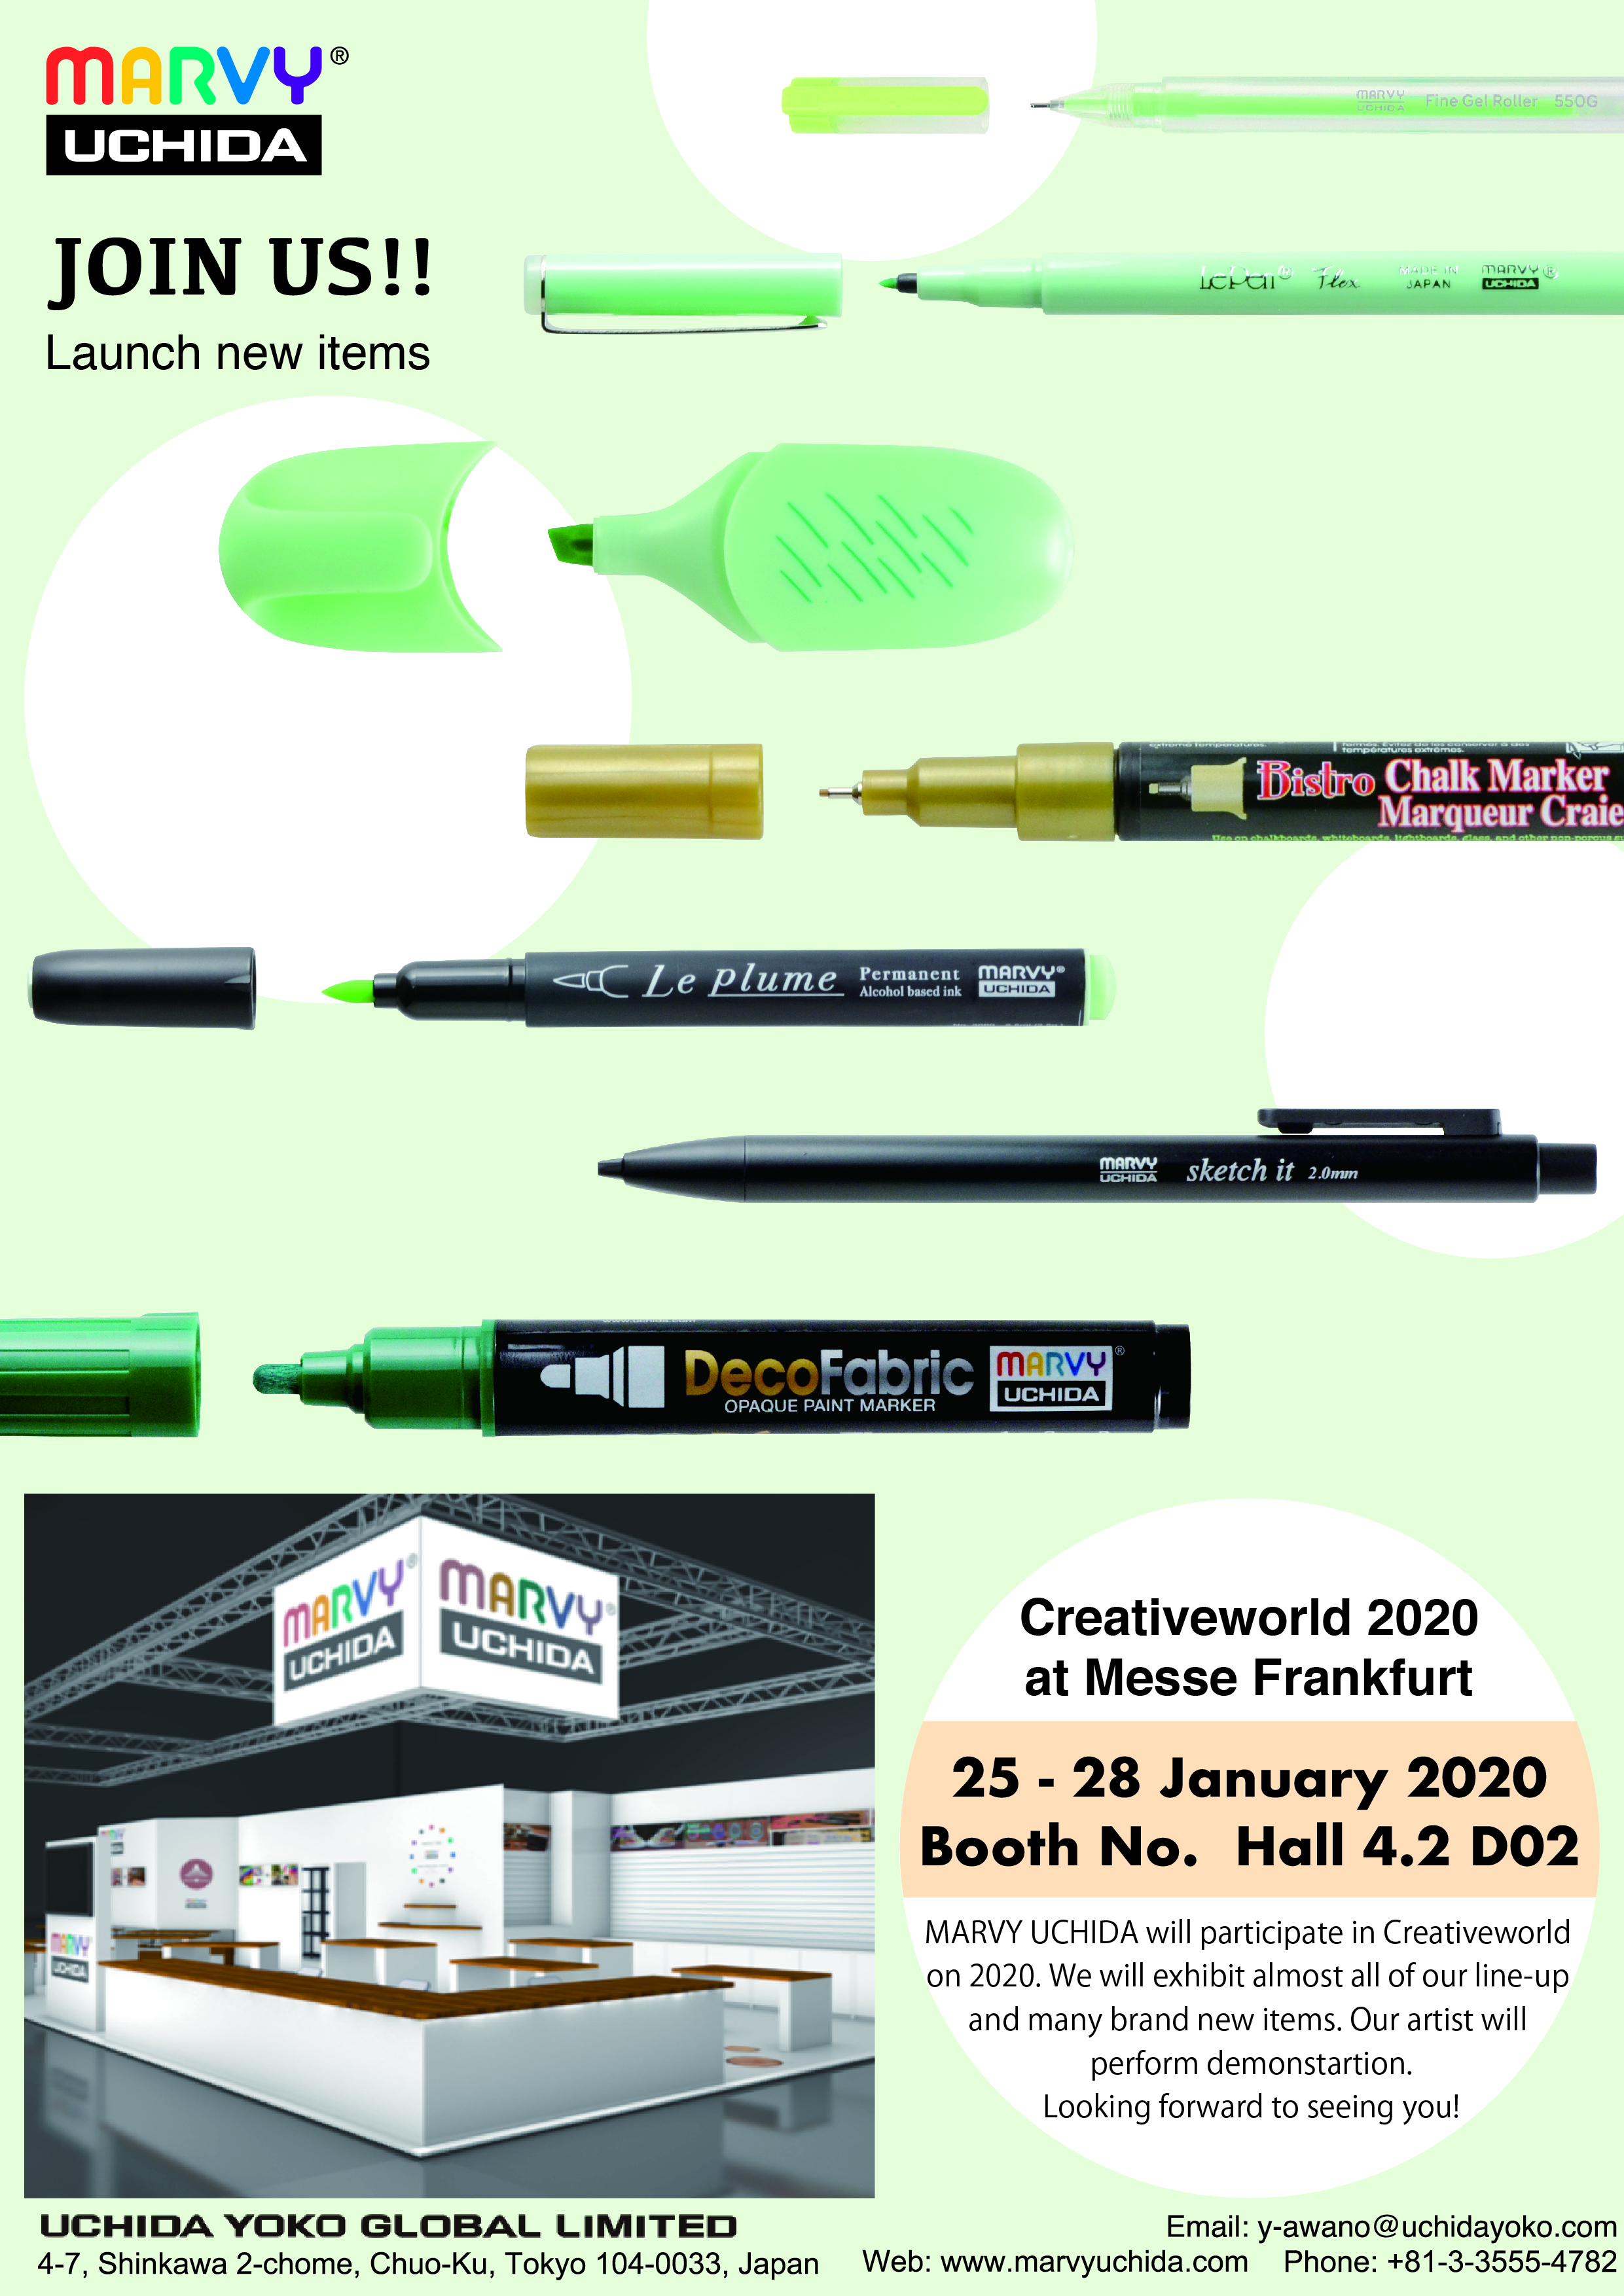 We will participate in Creativeworld 2020 in Frankfurt, Germany